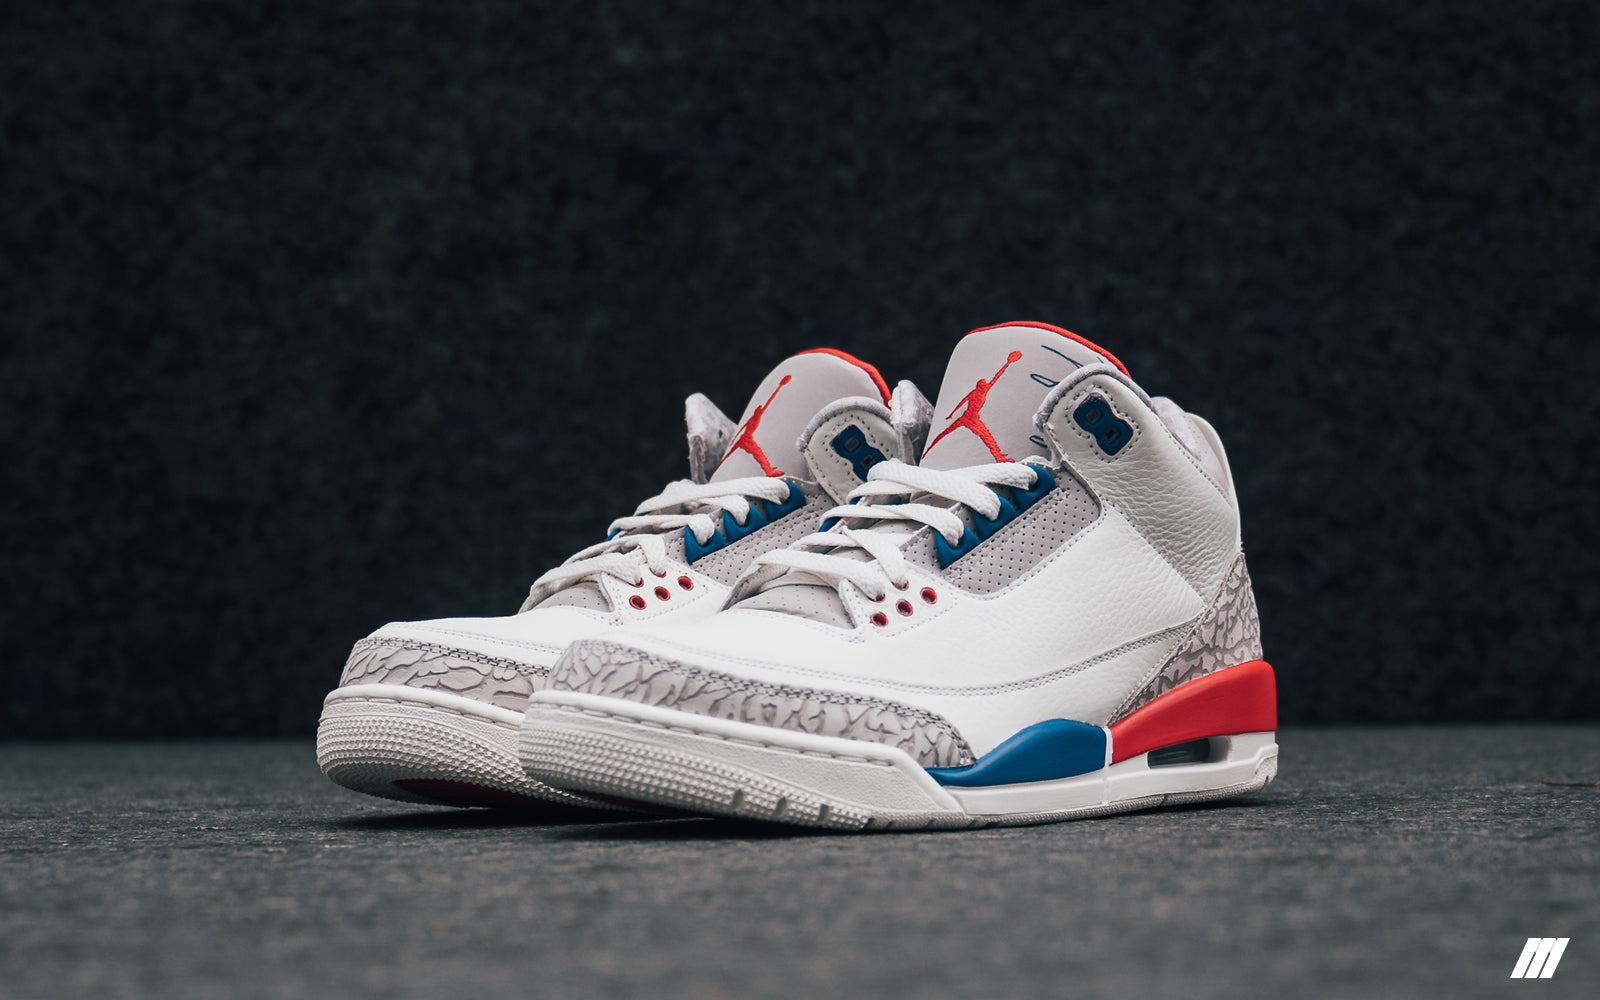 BSTN Store - Inspired by Magic Johnson Midsummer Night's Magic Charity Game  back in 1988, the Air Jordan III Retro Charity Game features premium,  full-grain leather and a copy of MJ's signature